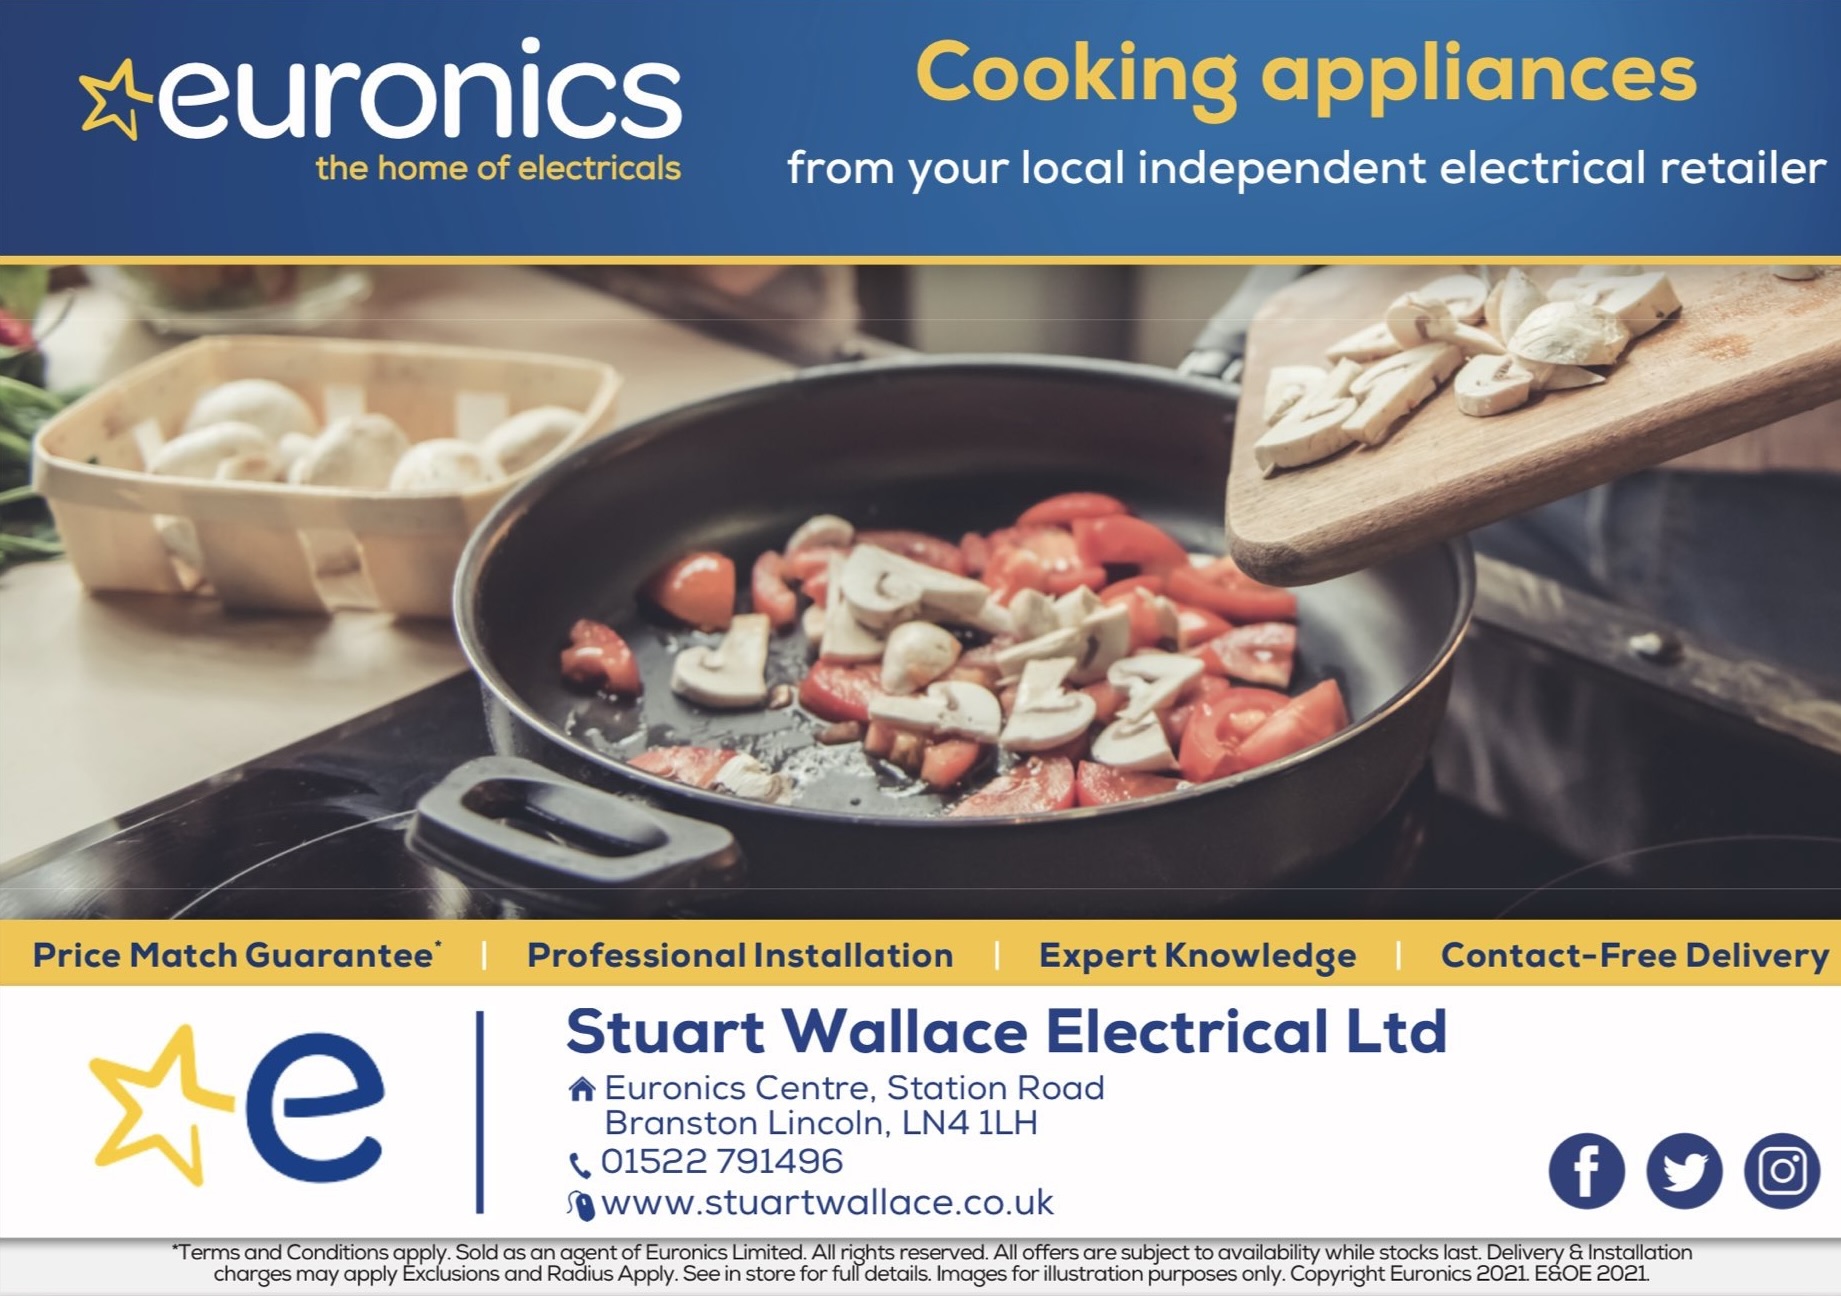 Valentines In Lincolnshire with Stuart Wallace Electrical Ltd of Branston on WhatsOnLincs, what's on in Lincolnshire by LincsConnect the Lincolnshire blogger, LincsBlogger